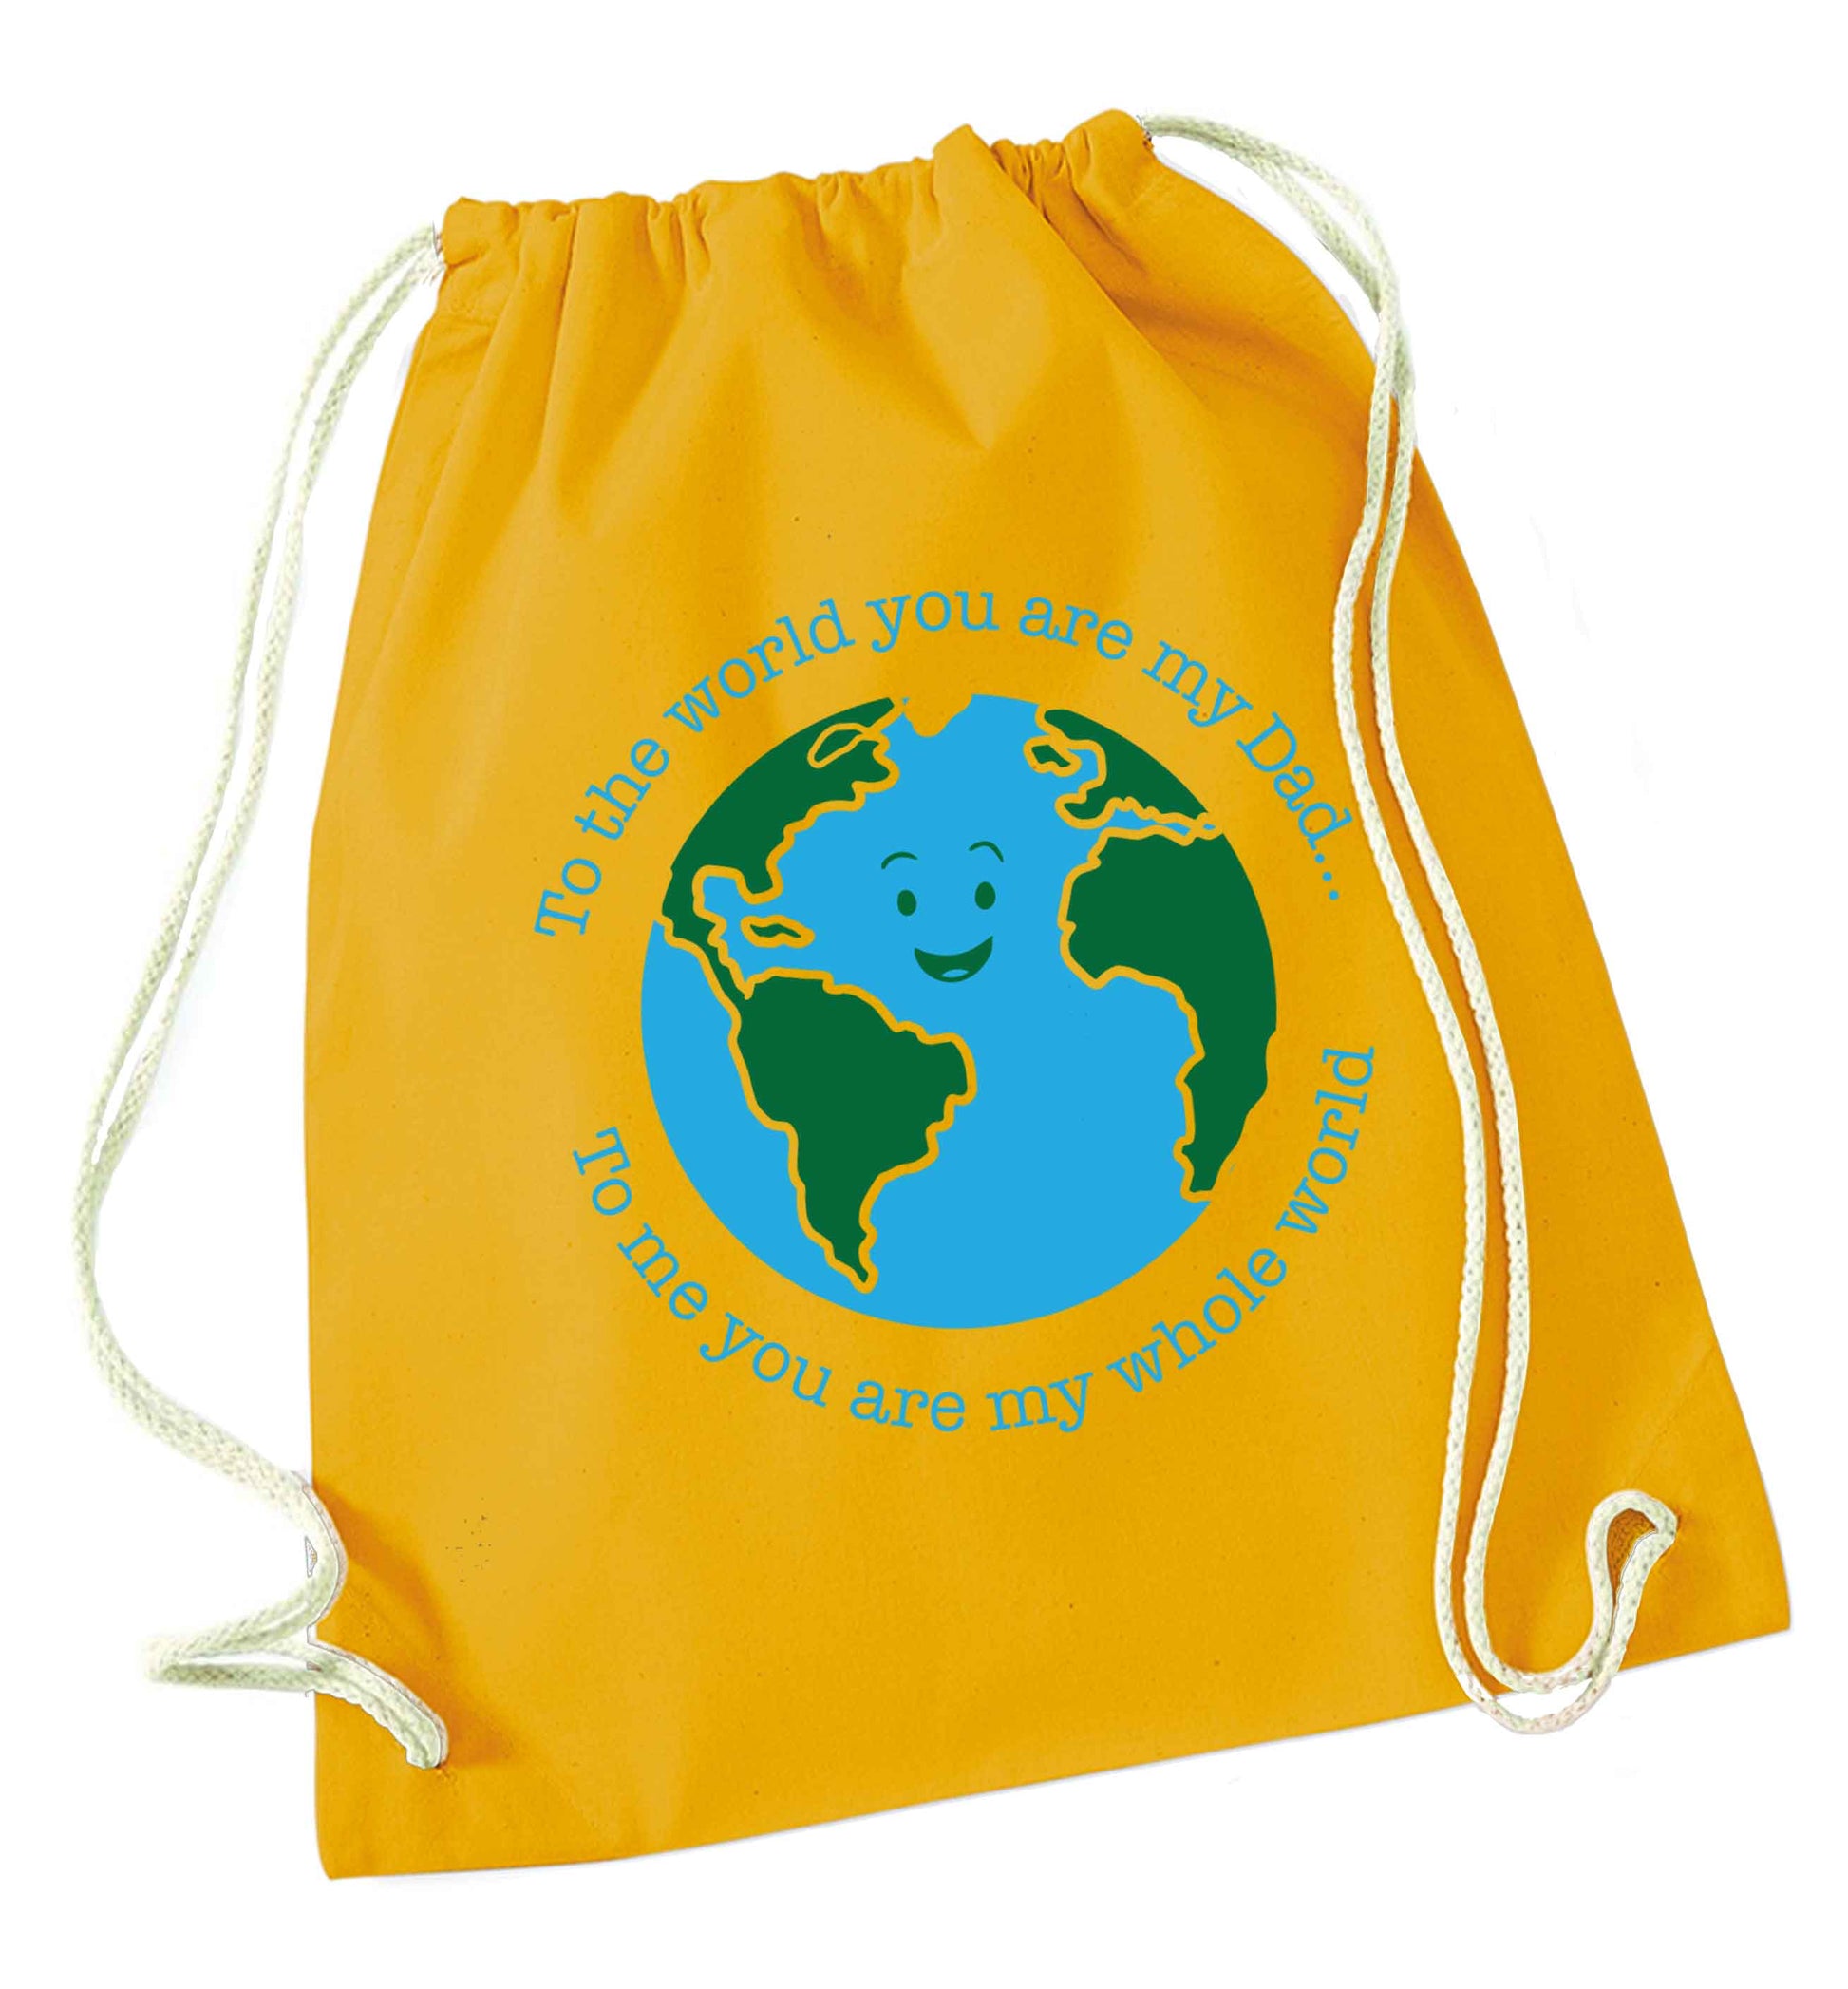 To the world you are my dad, to me you are my whole world mustard drawstring bag